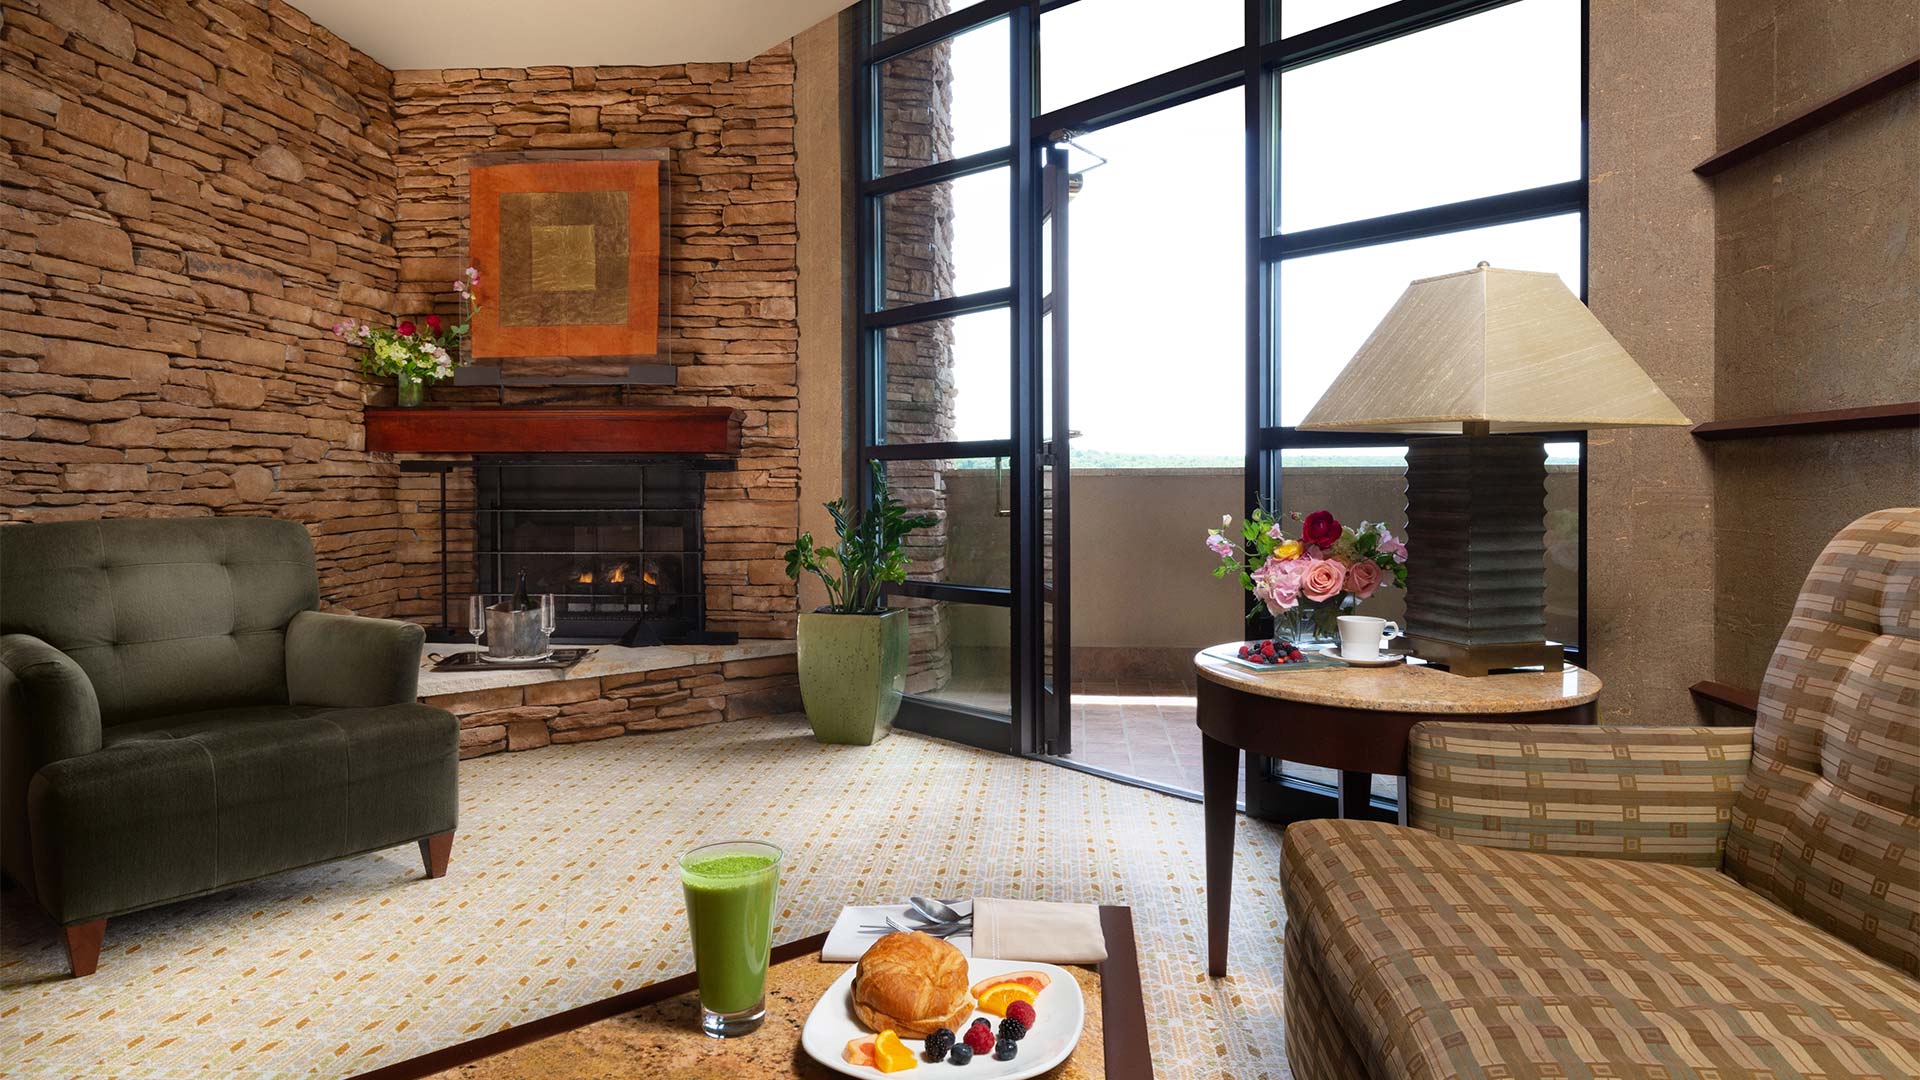 interior shot of Falling Rock's double suite living area. There is a couch and an arm chair around a coffee table with breakfast on it. There is a fireplace in the background and a door leading out onto a balcony